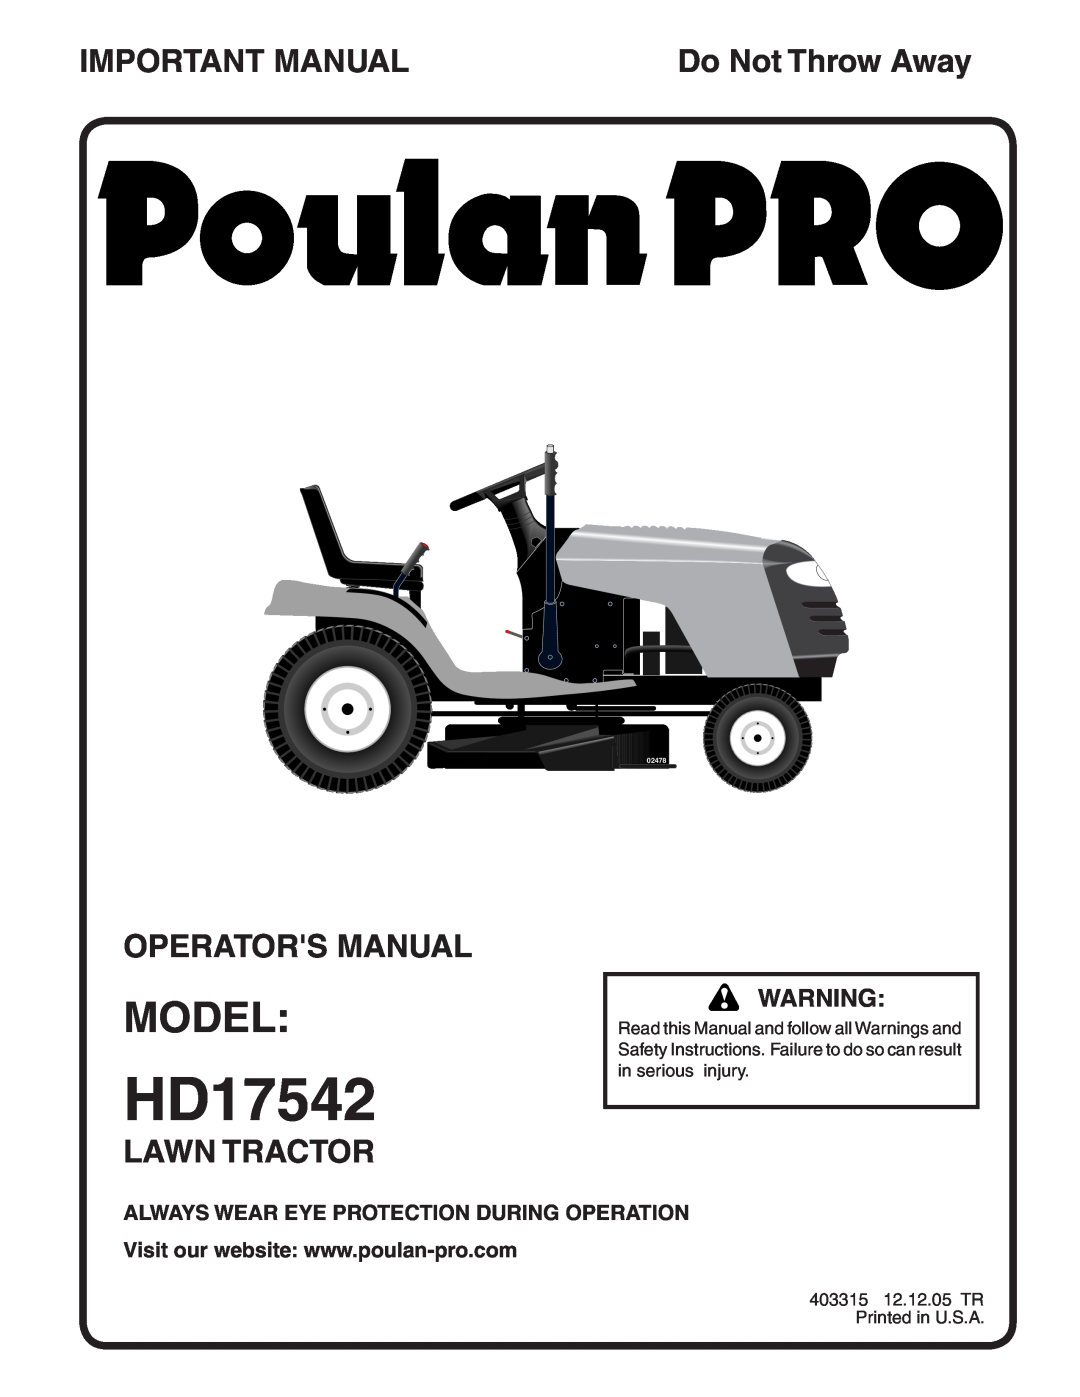 Poulan HD17542 manual Model, Important Manual, Operators Manual, Lawn Tractor, Always Wear Eye Protection During Operation 